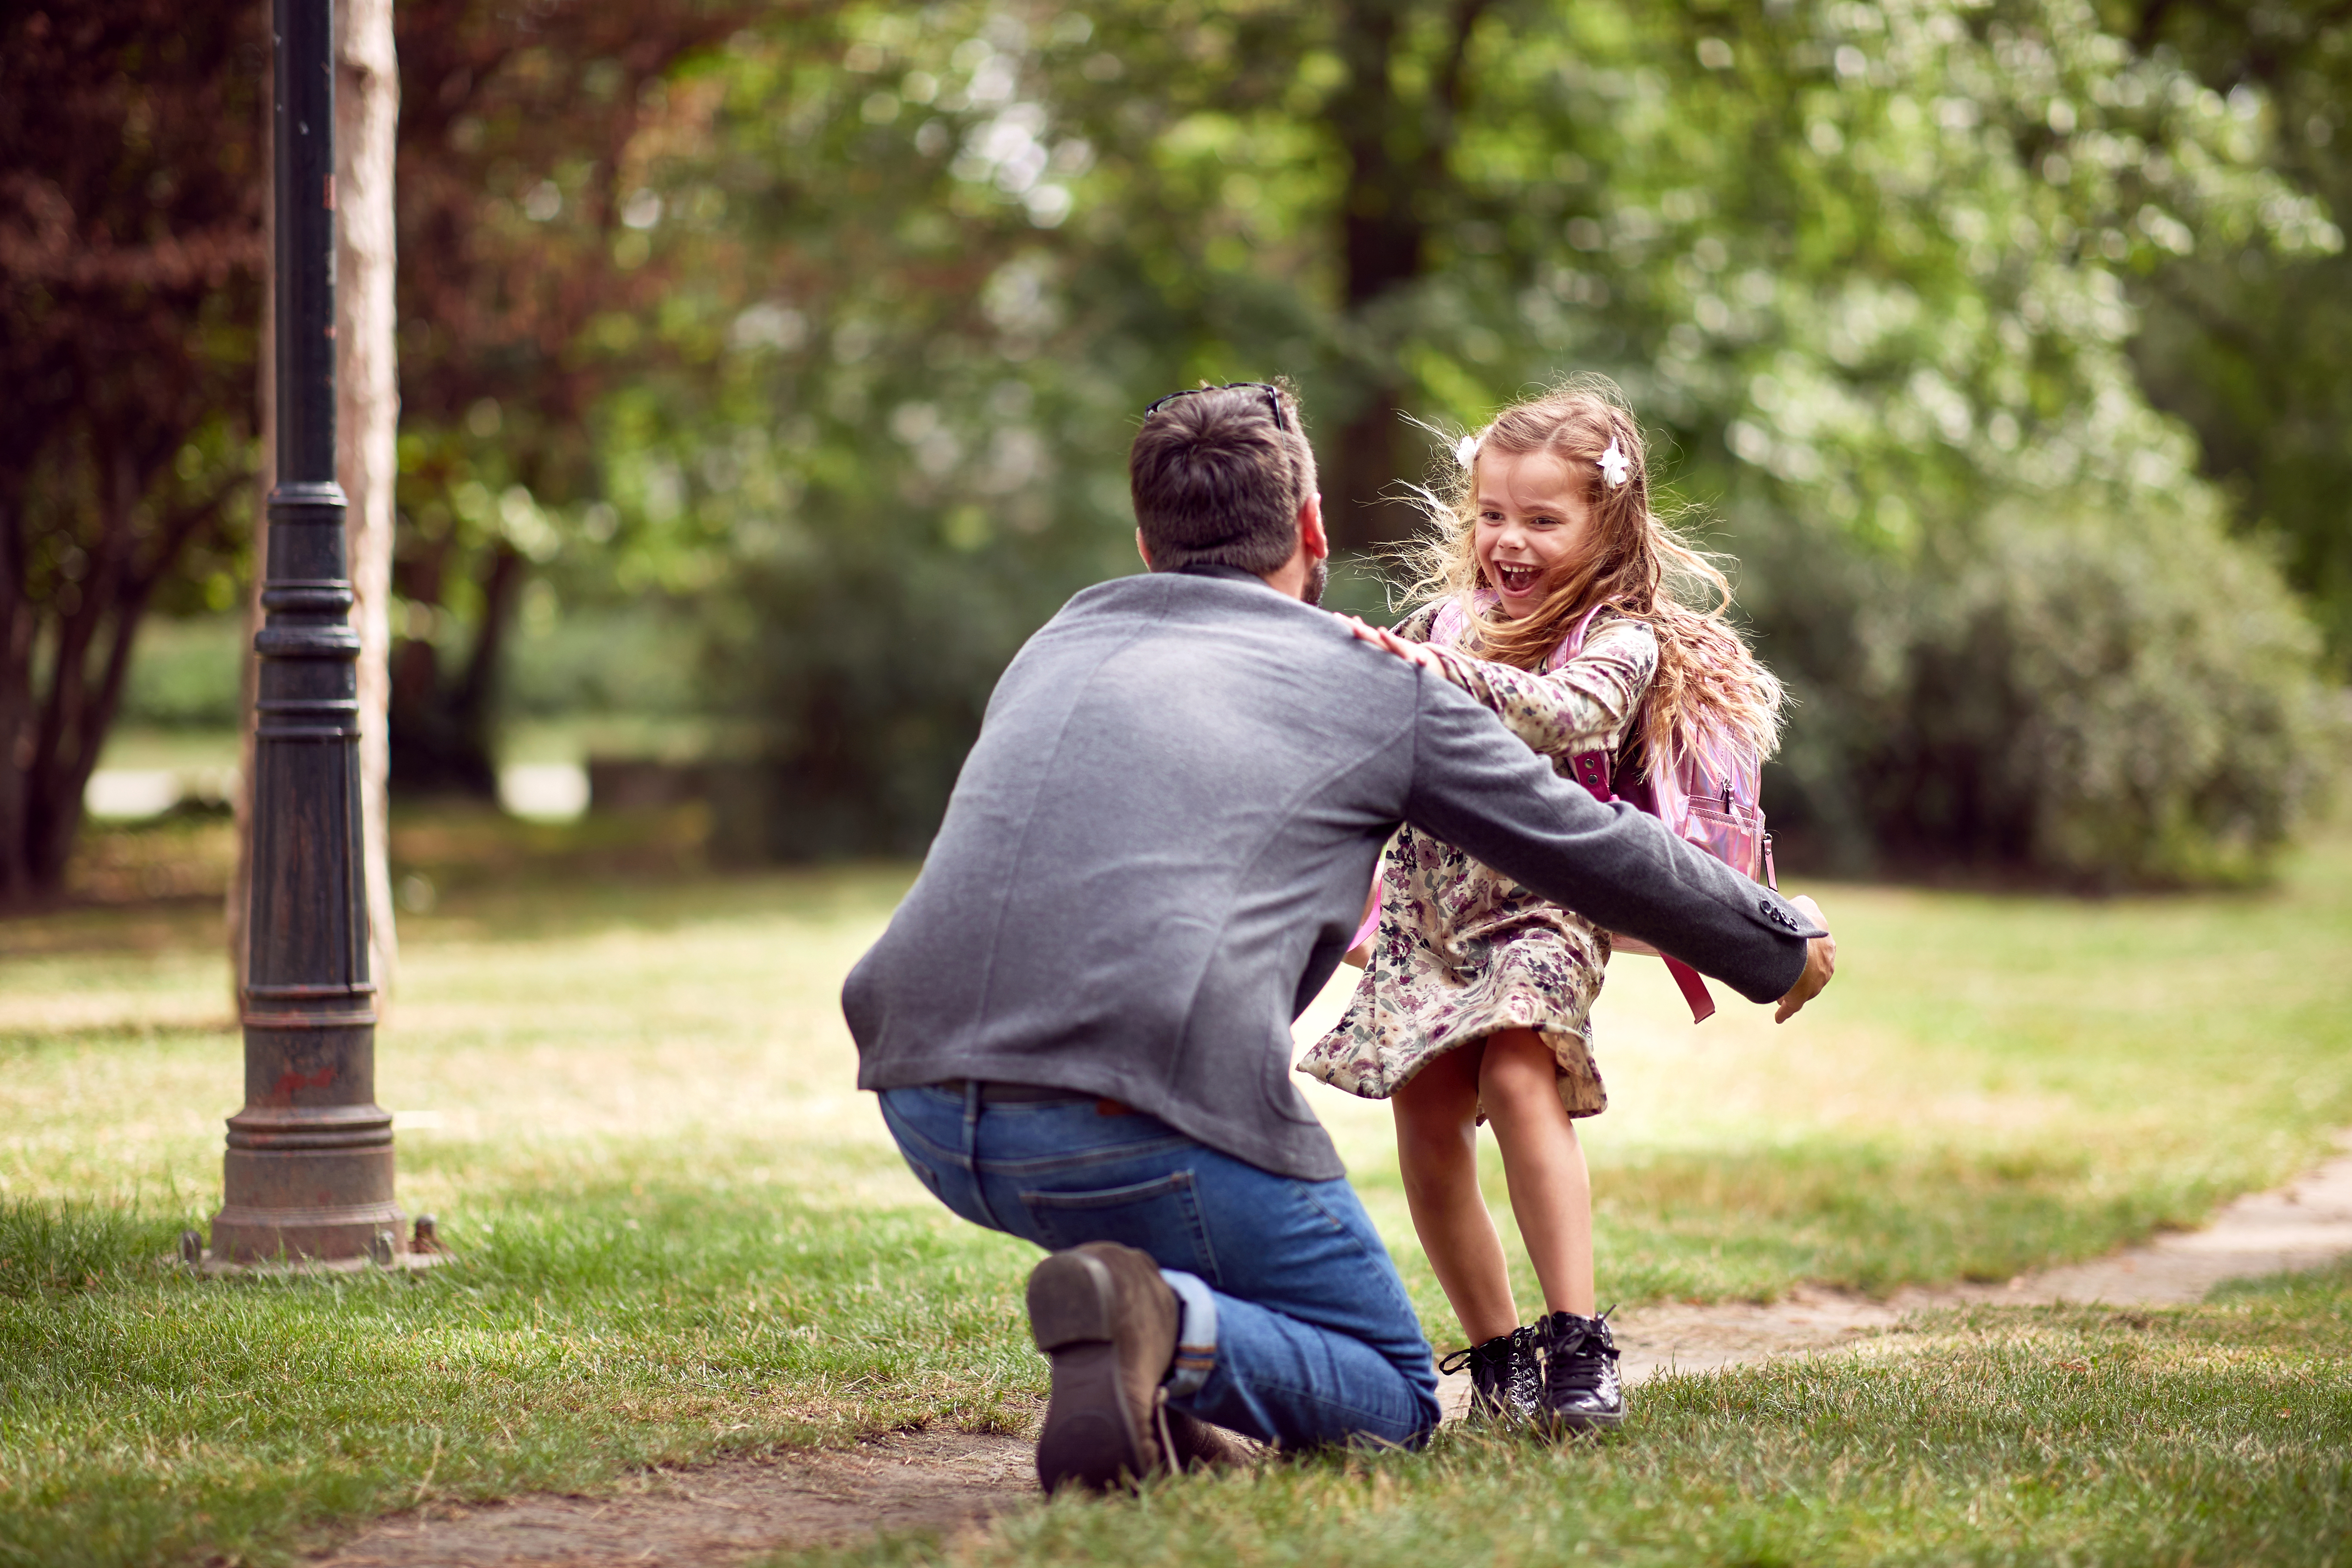 Father embracing daughter. | Source: Shutterstock